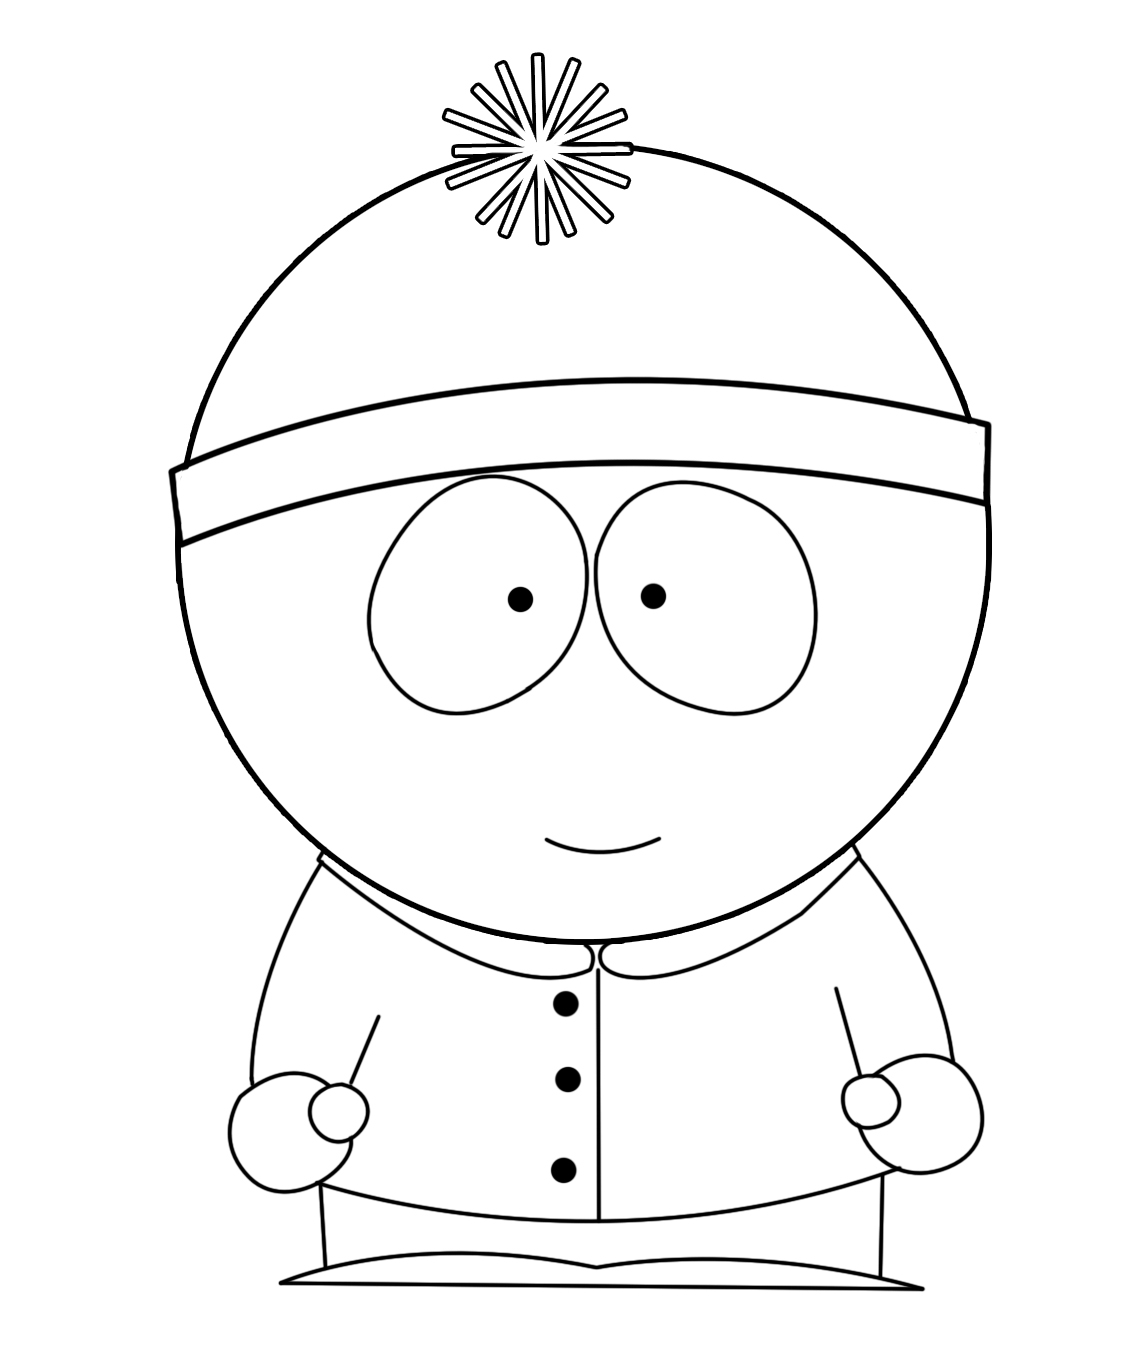 Drawing South Park #31245 (Cartoons) – Printable coloring pages